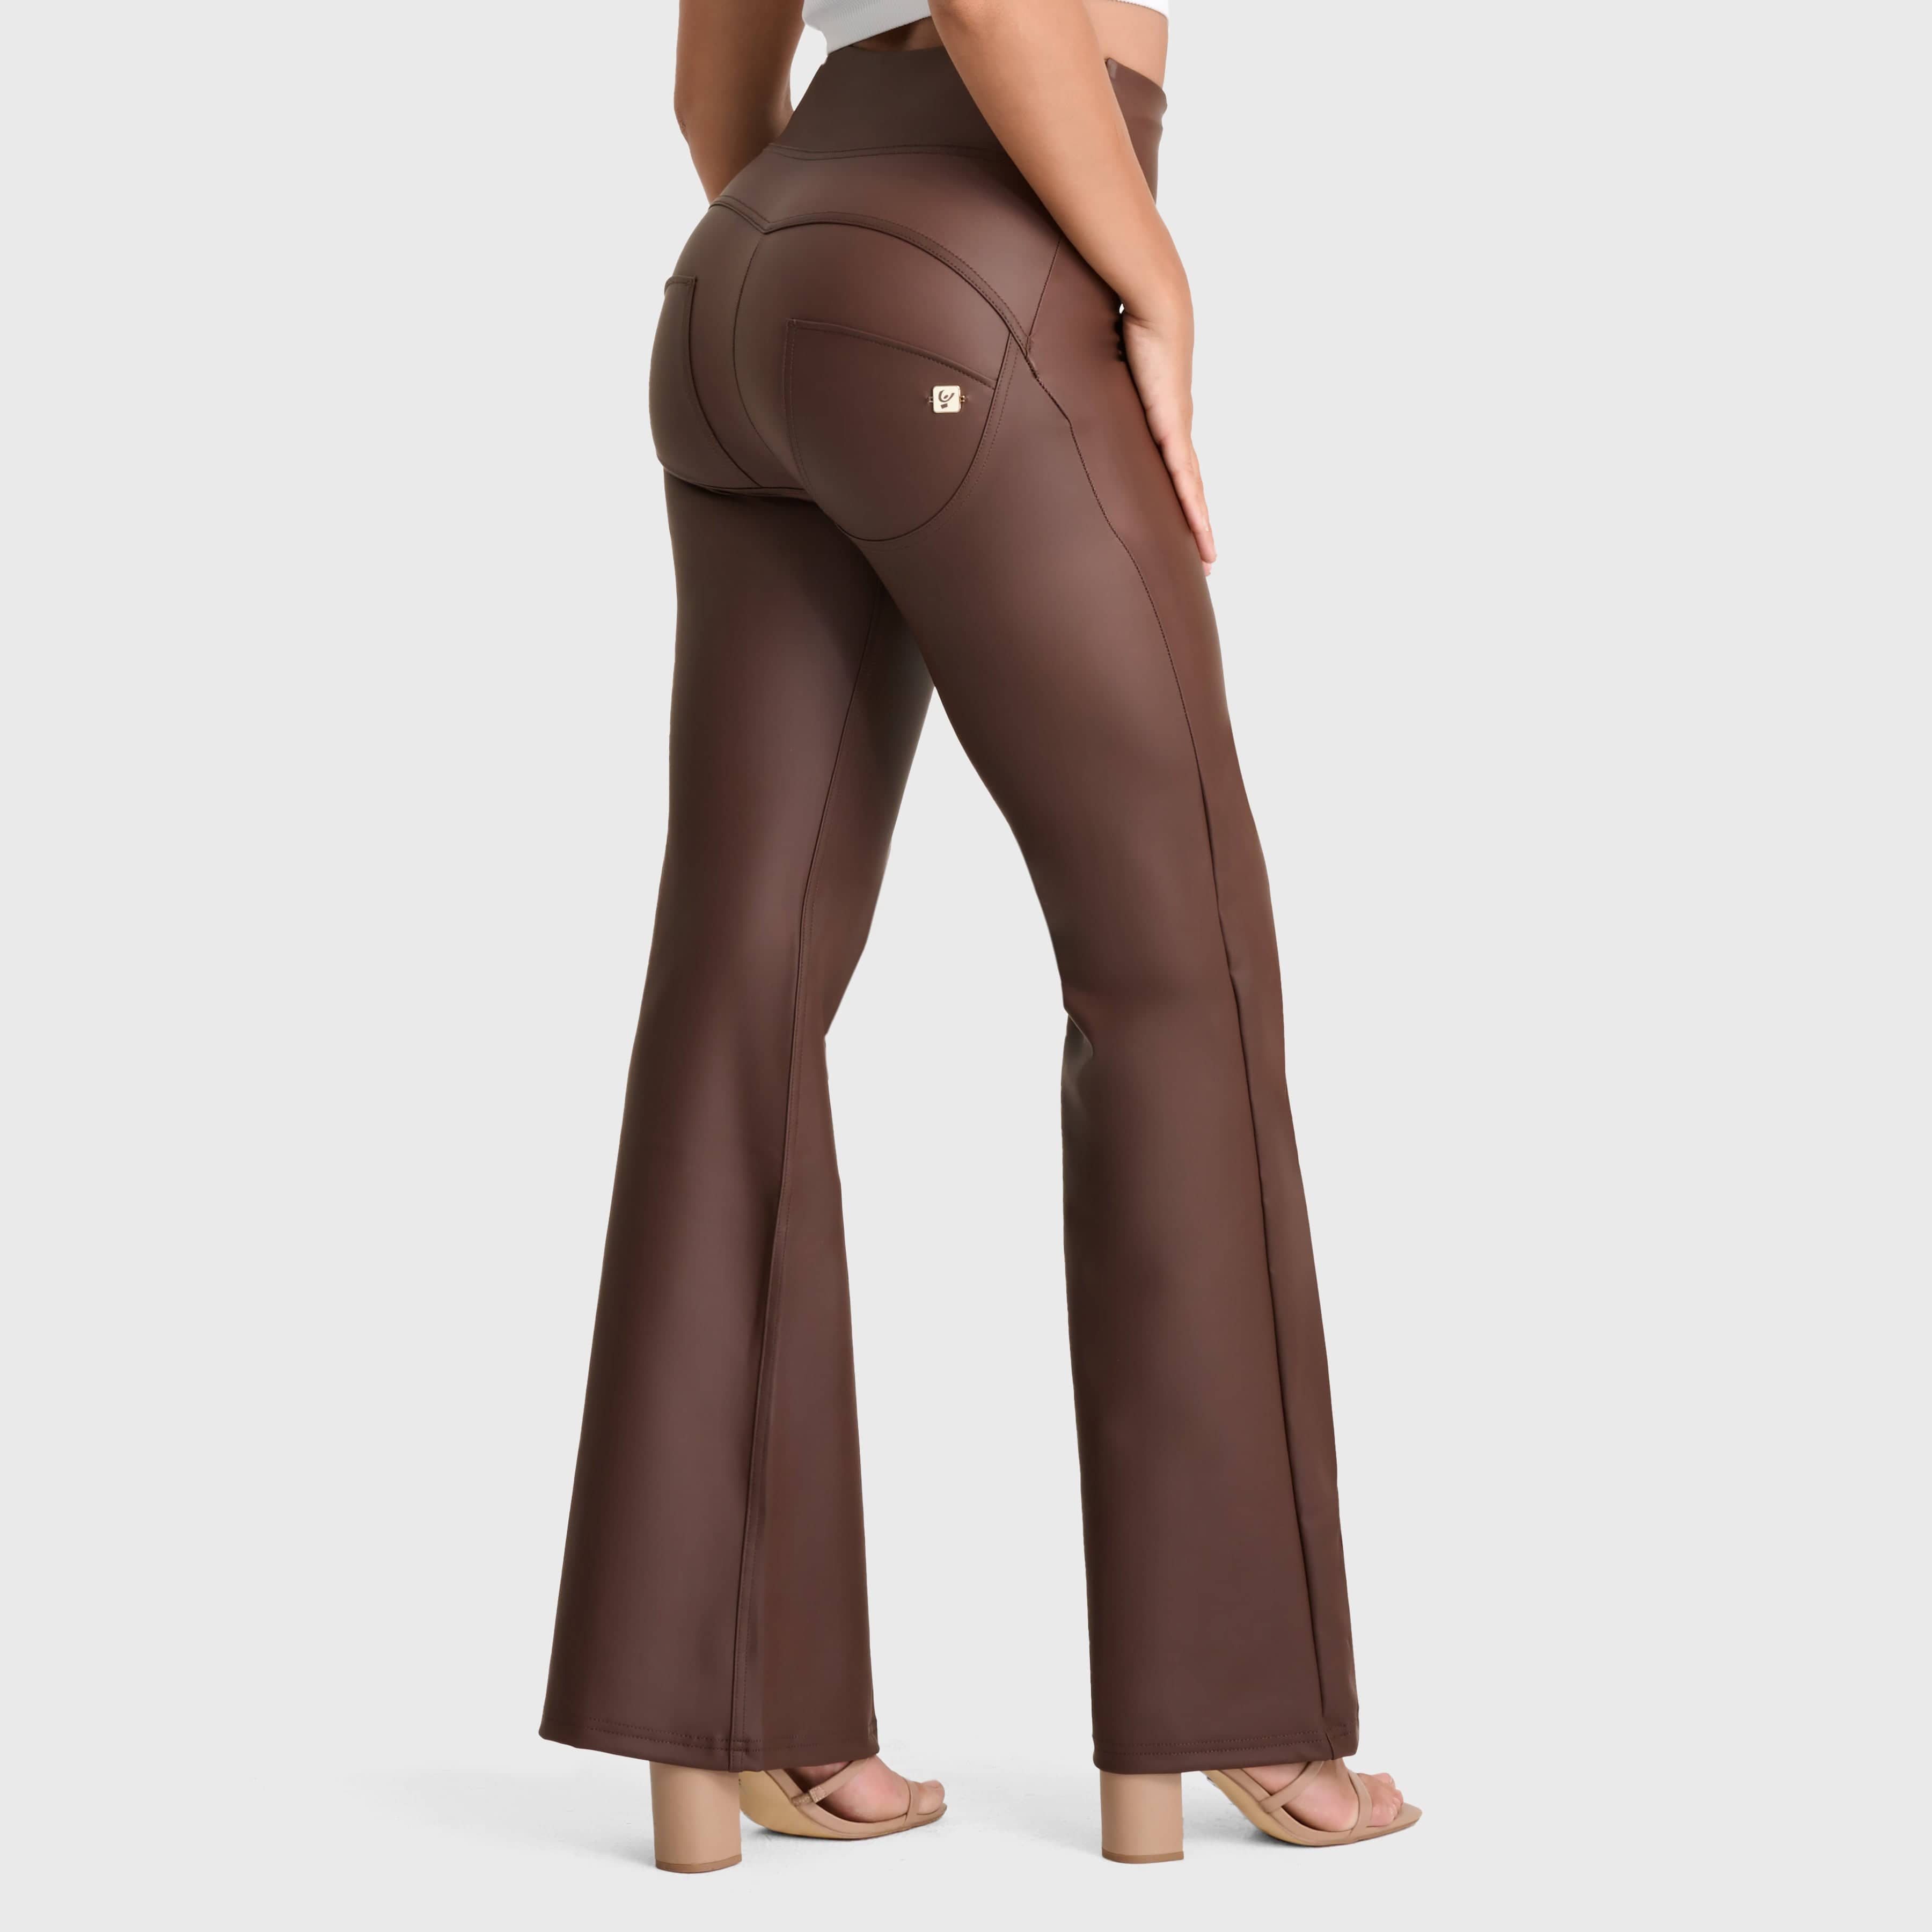 WR.UP®Faux Leather - Super High Waisted - Super Flare - Chocolate 1